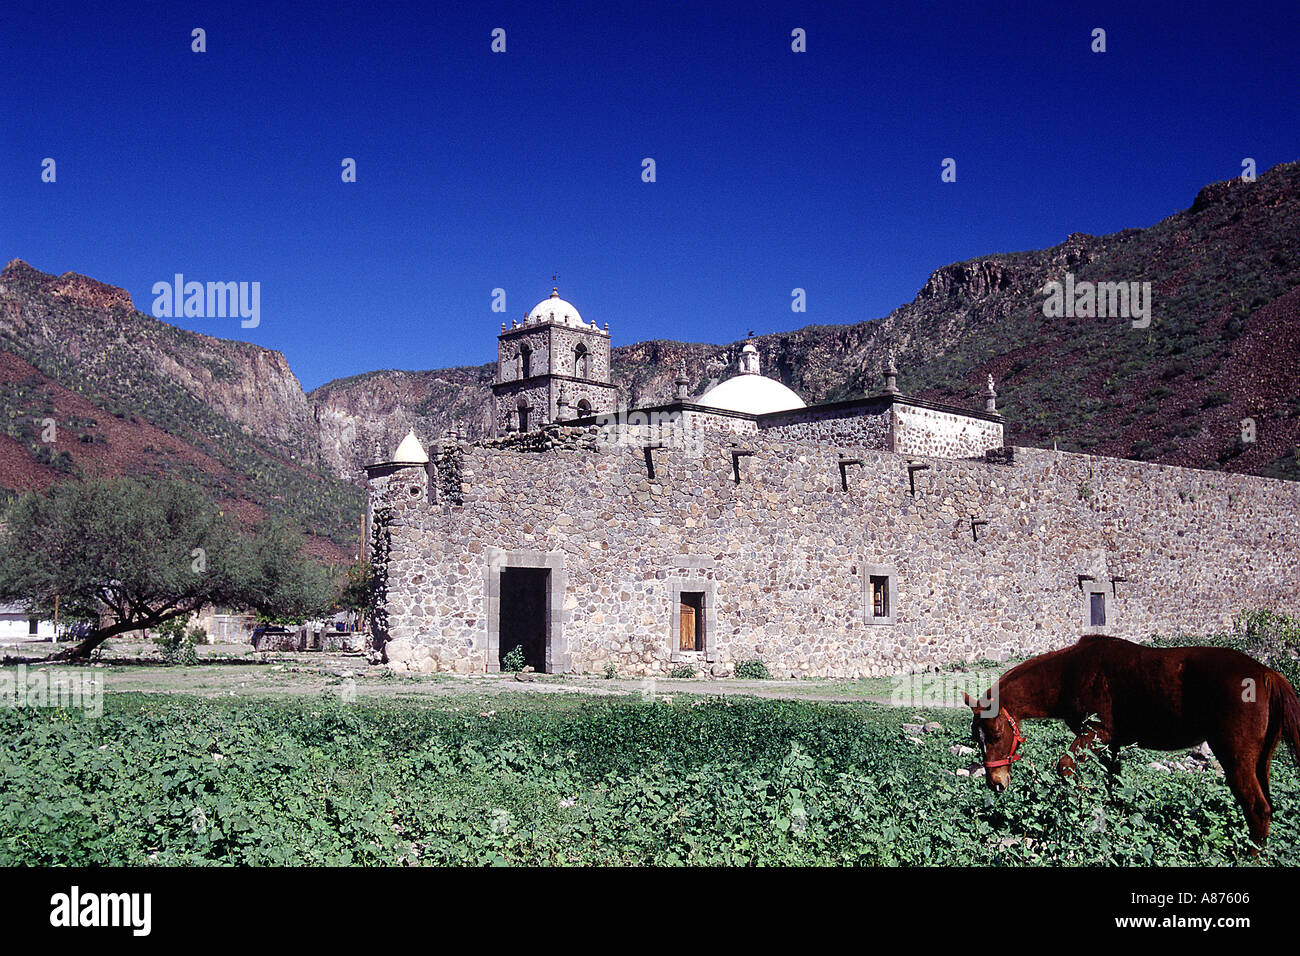 A horse grazing in pasture by Mission San Francisco Javier in Baja California Sur, Mexico Stock Photo